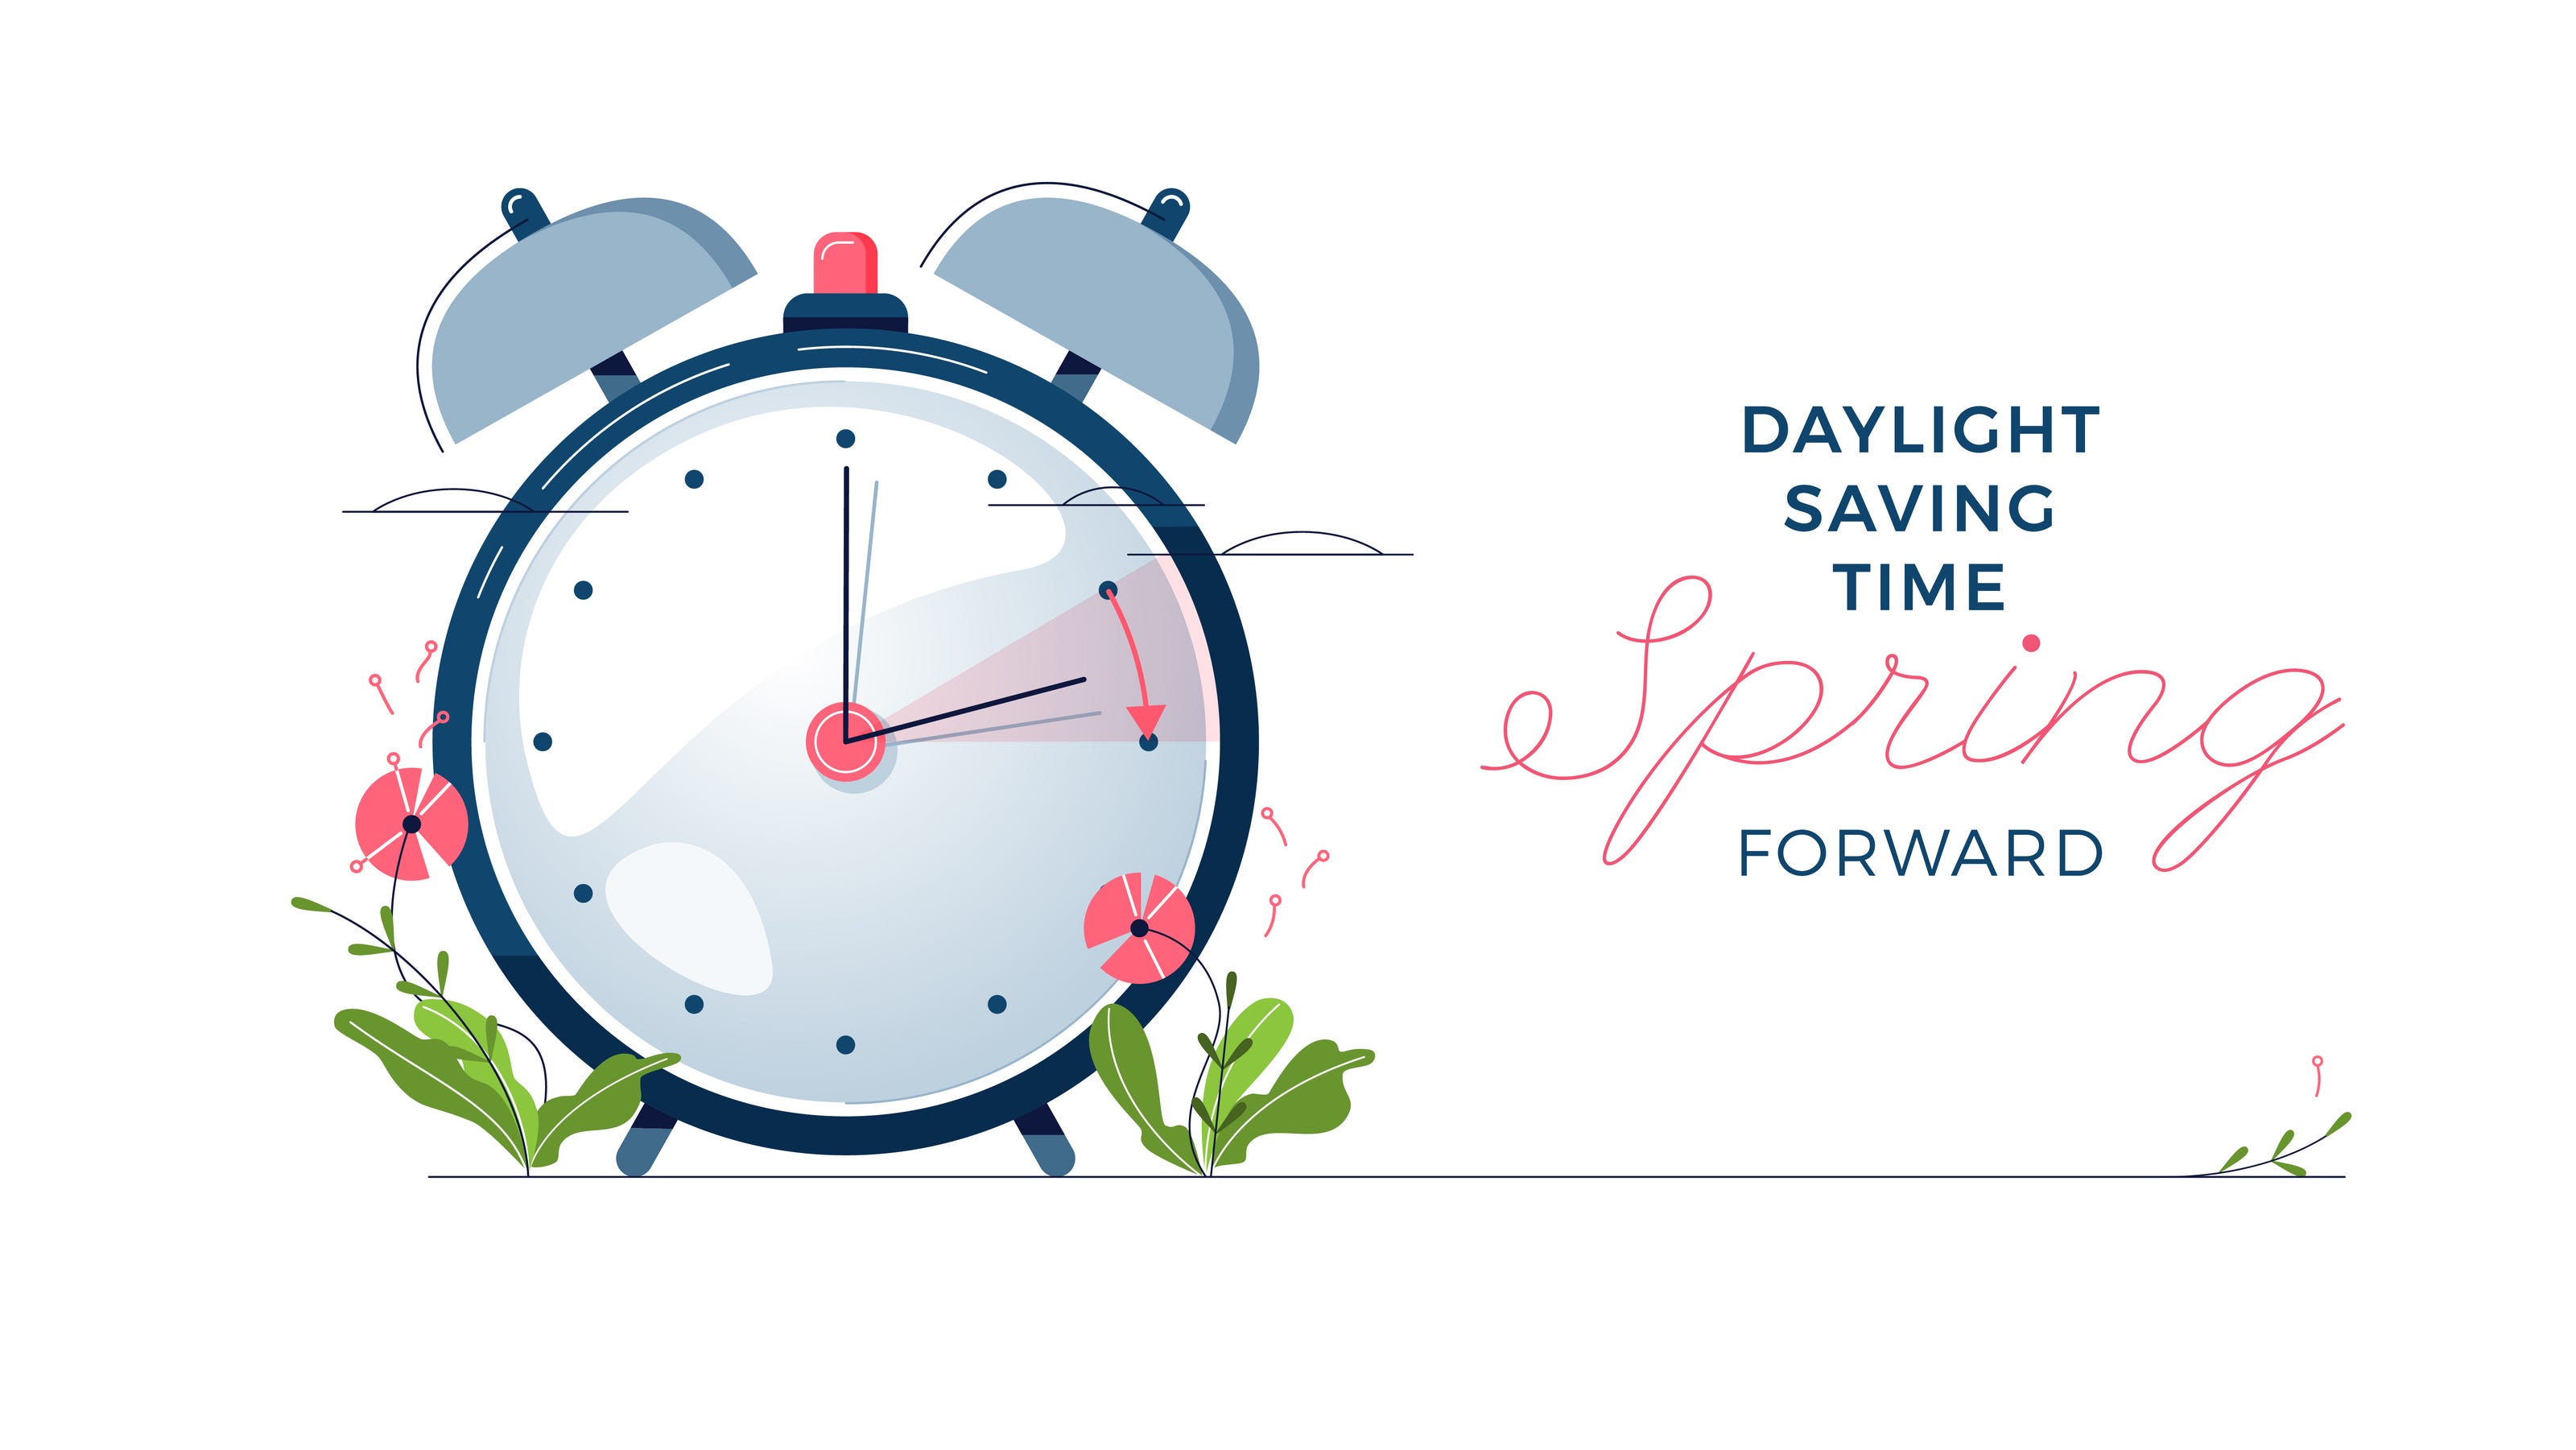 Daylight Saving Time 2021 March so clocks ahead this weekend